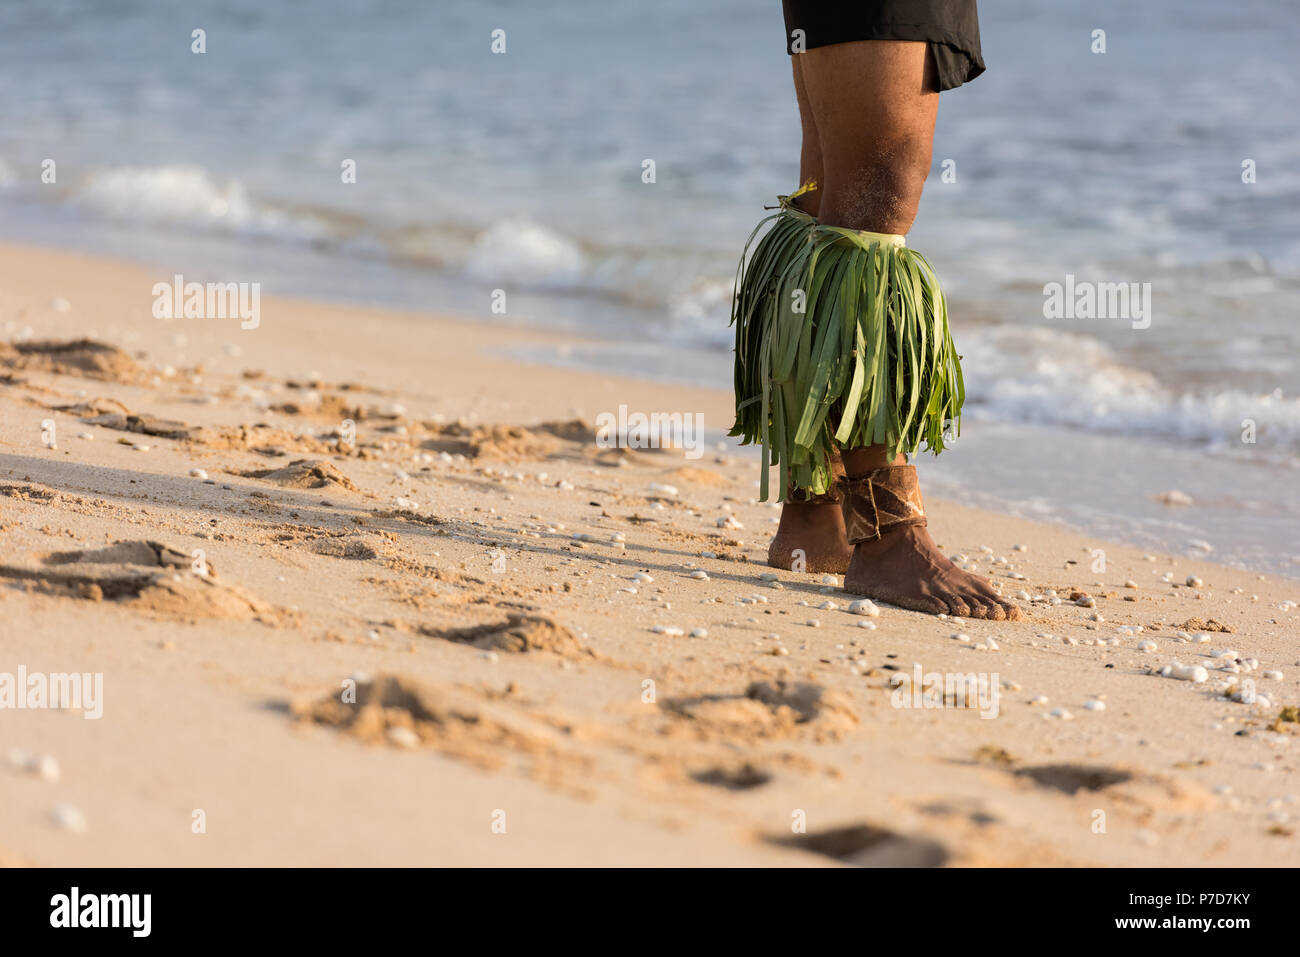 Male fire dancer performing at the beach Stock Photo